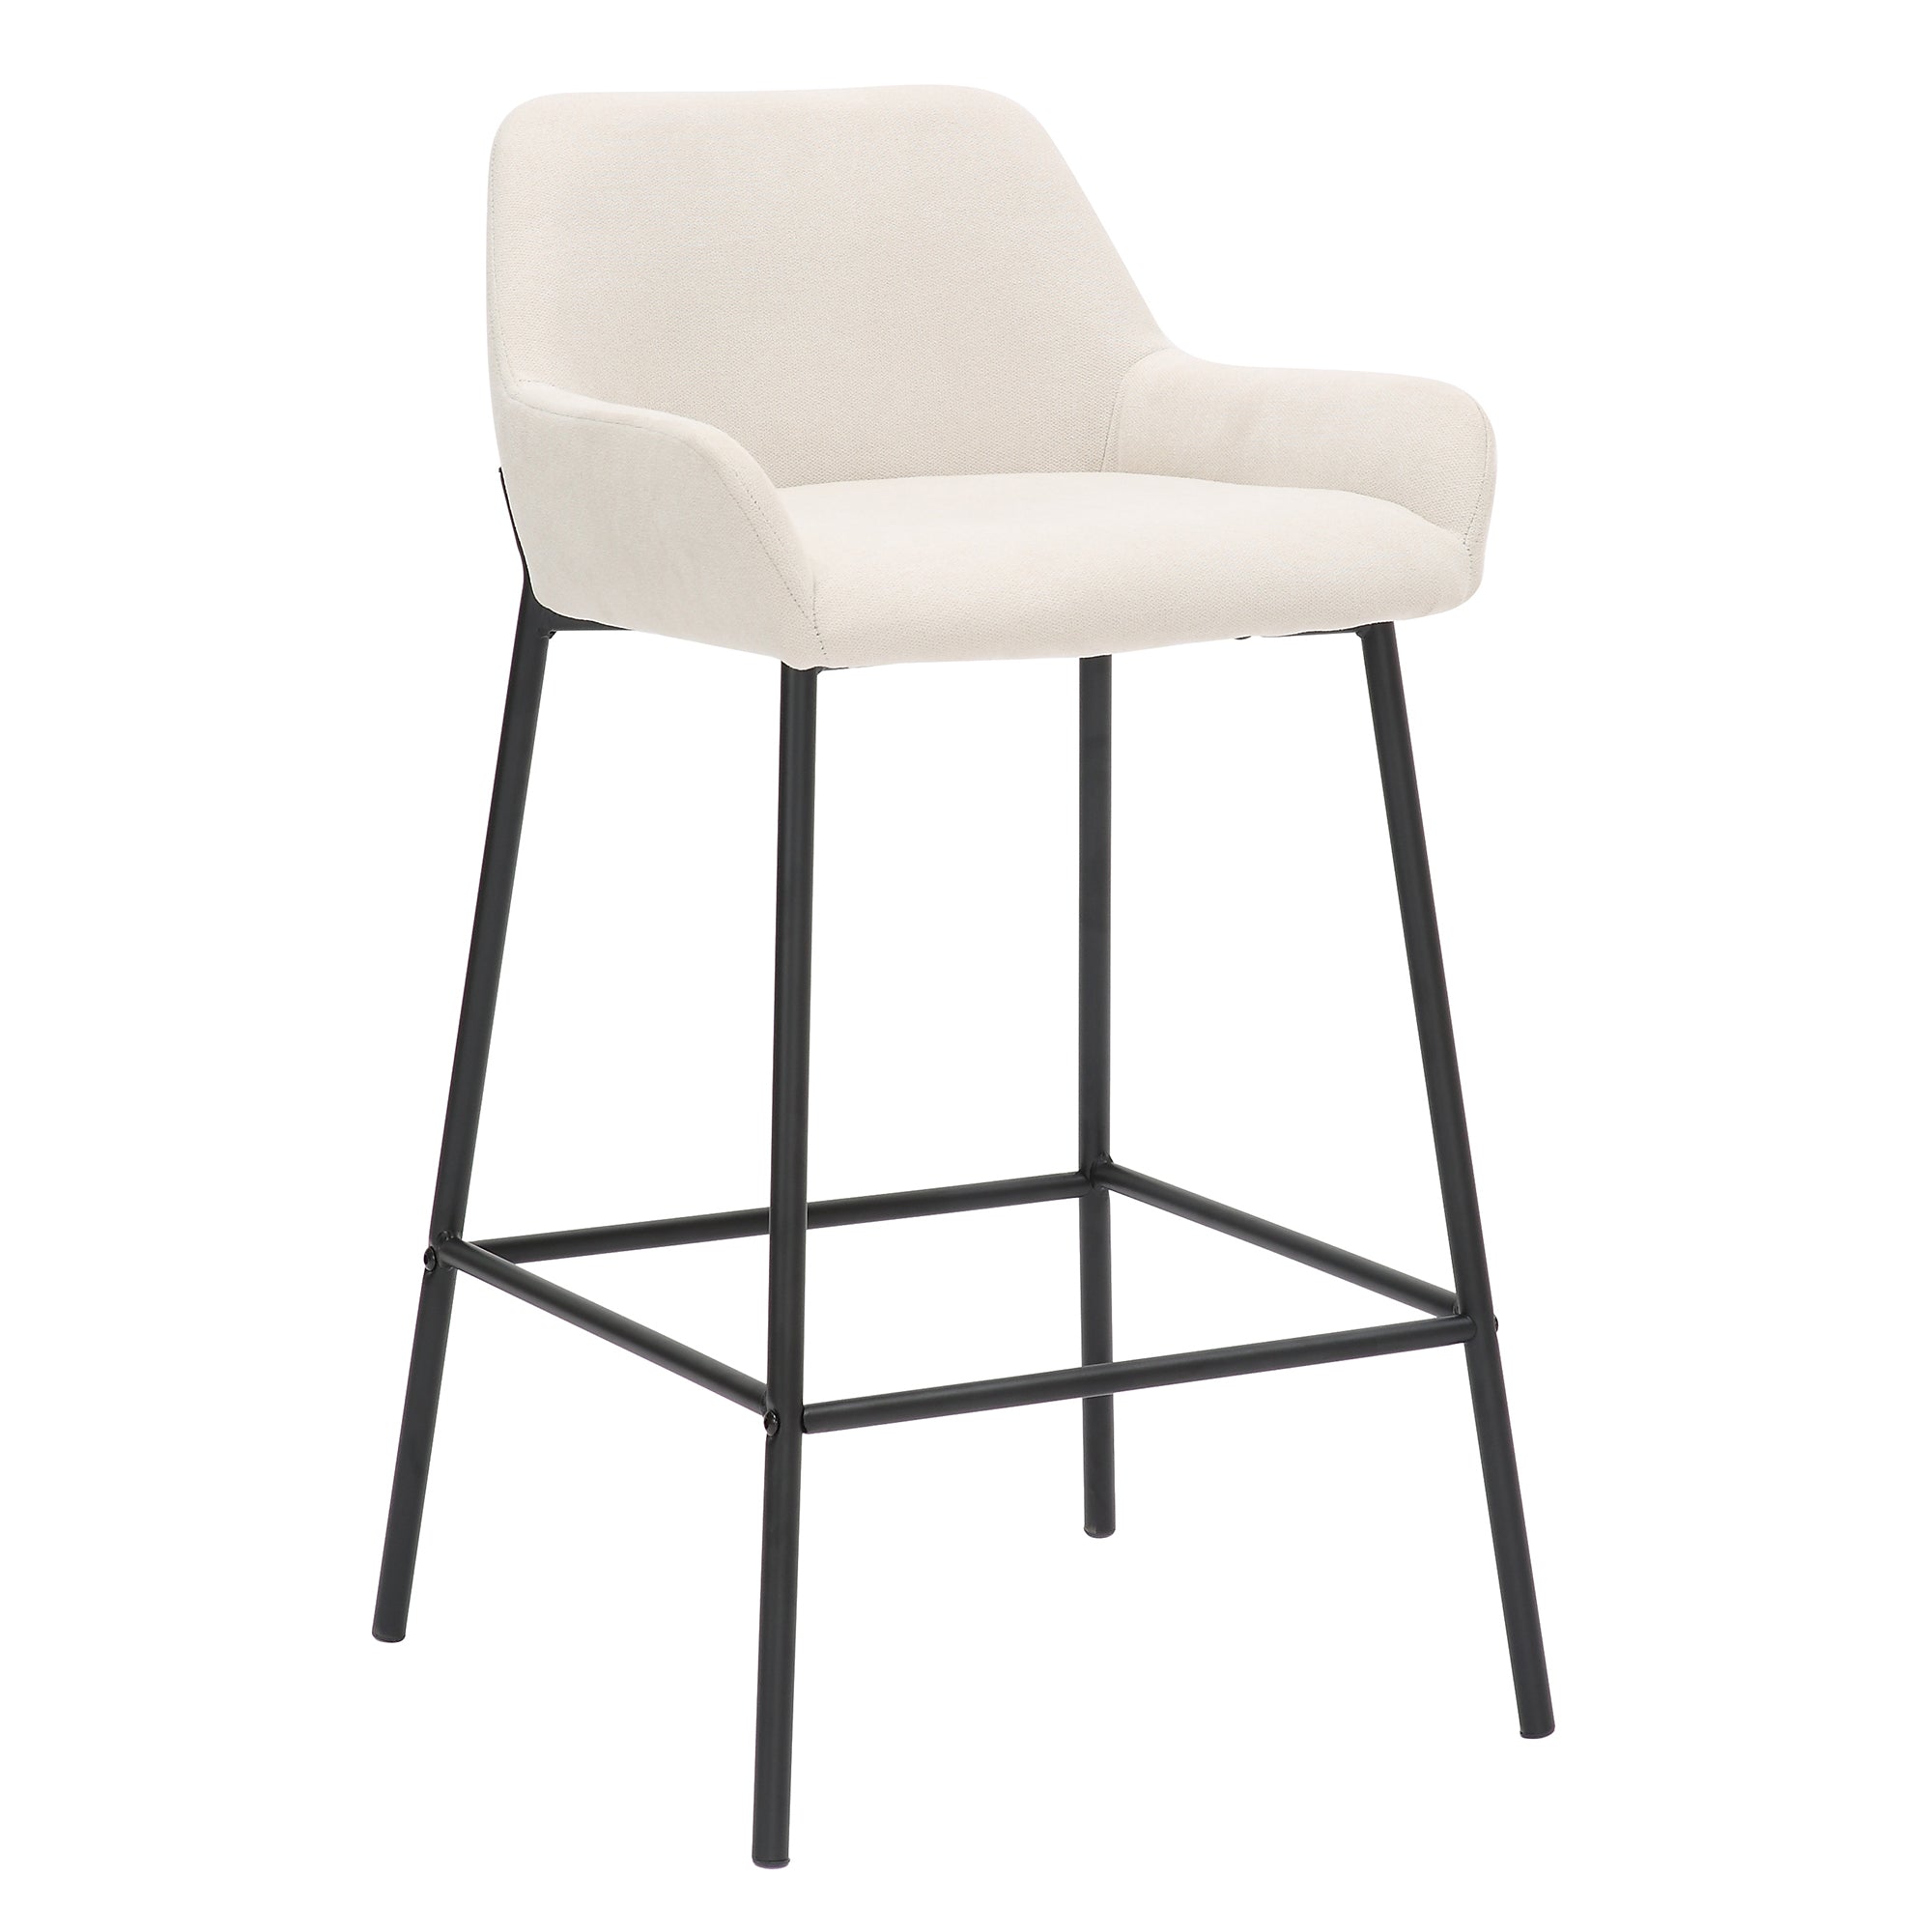 Baily 26" Counter Stool, Set of 2, in Beige and Black 203-541BEG